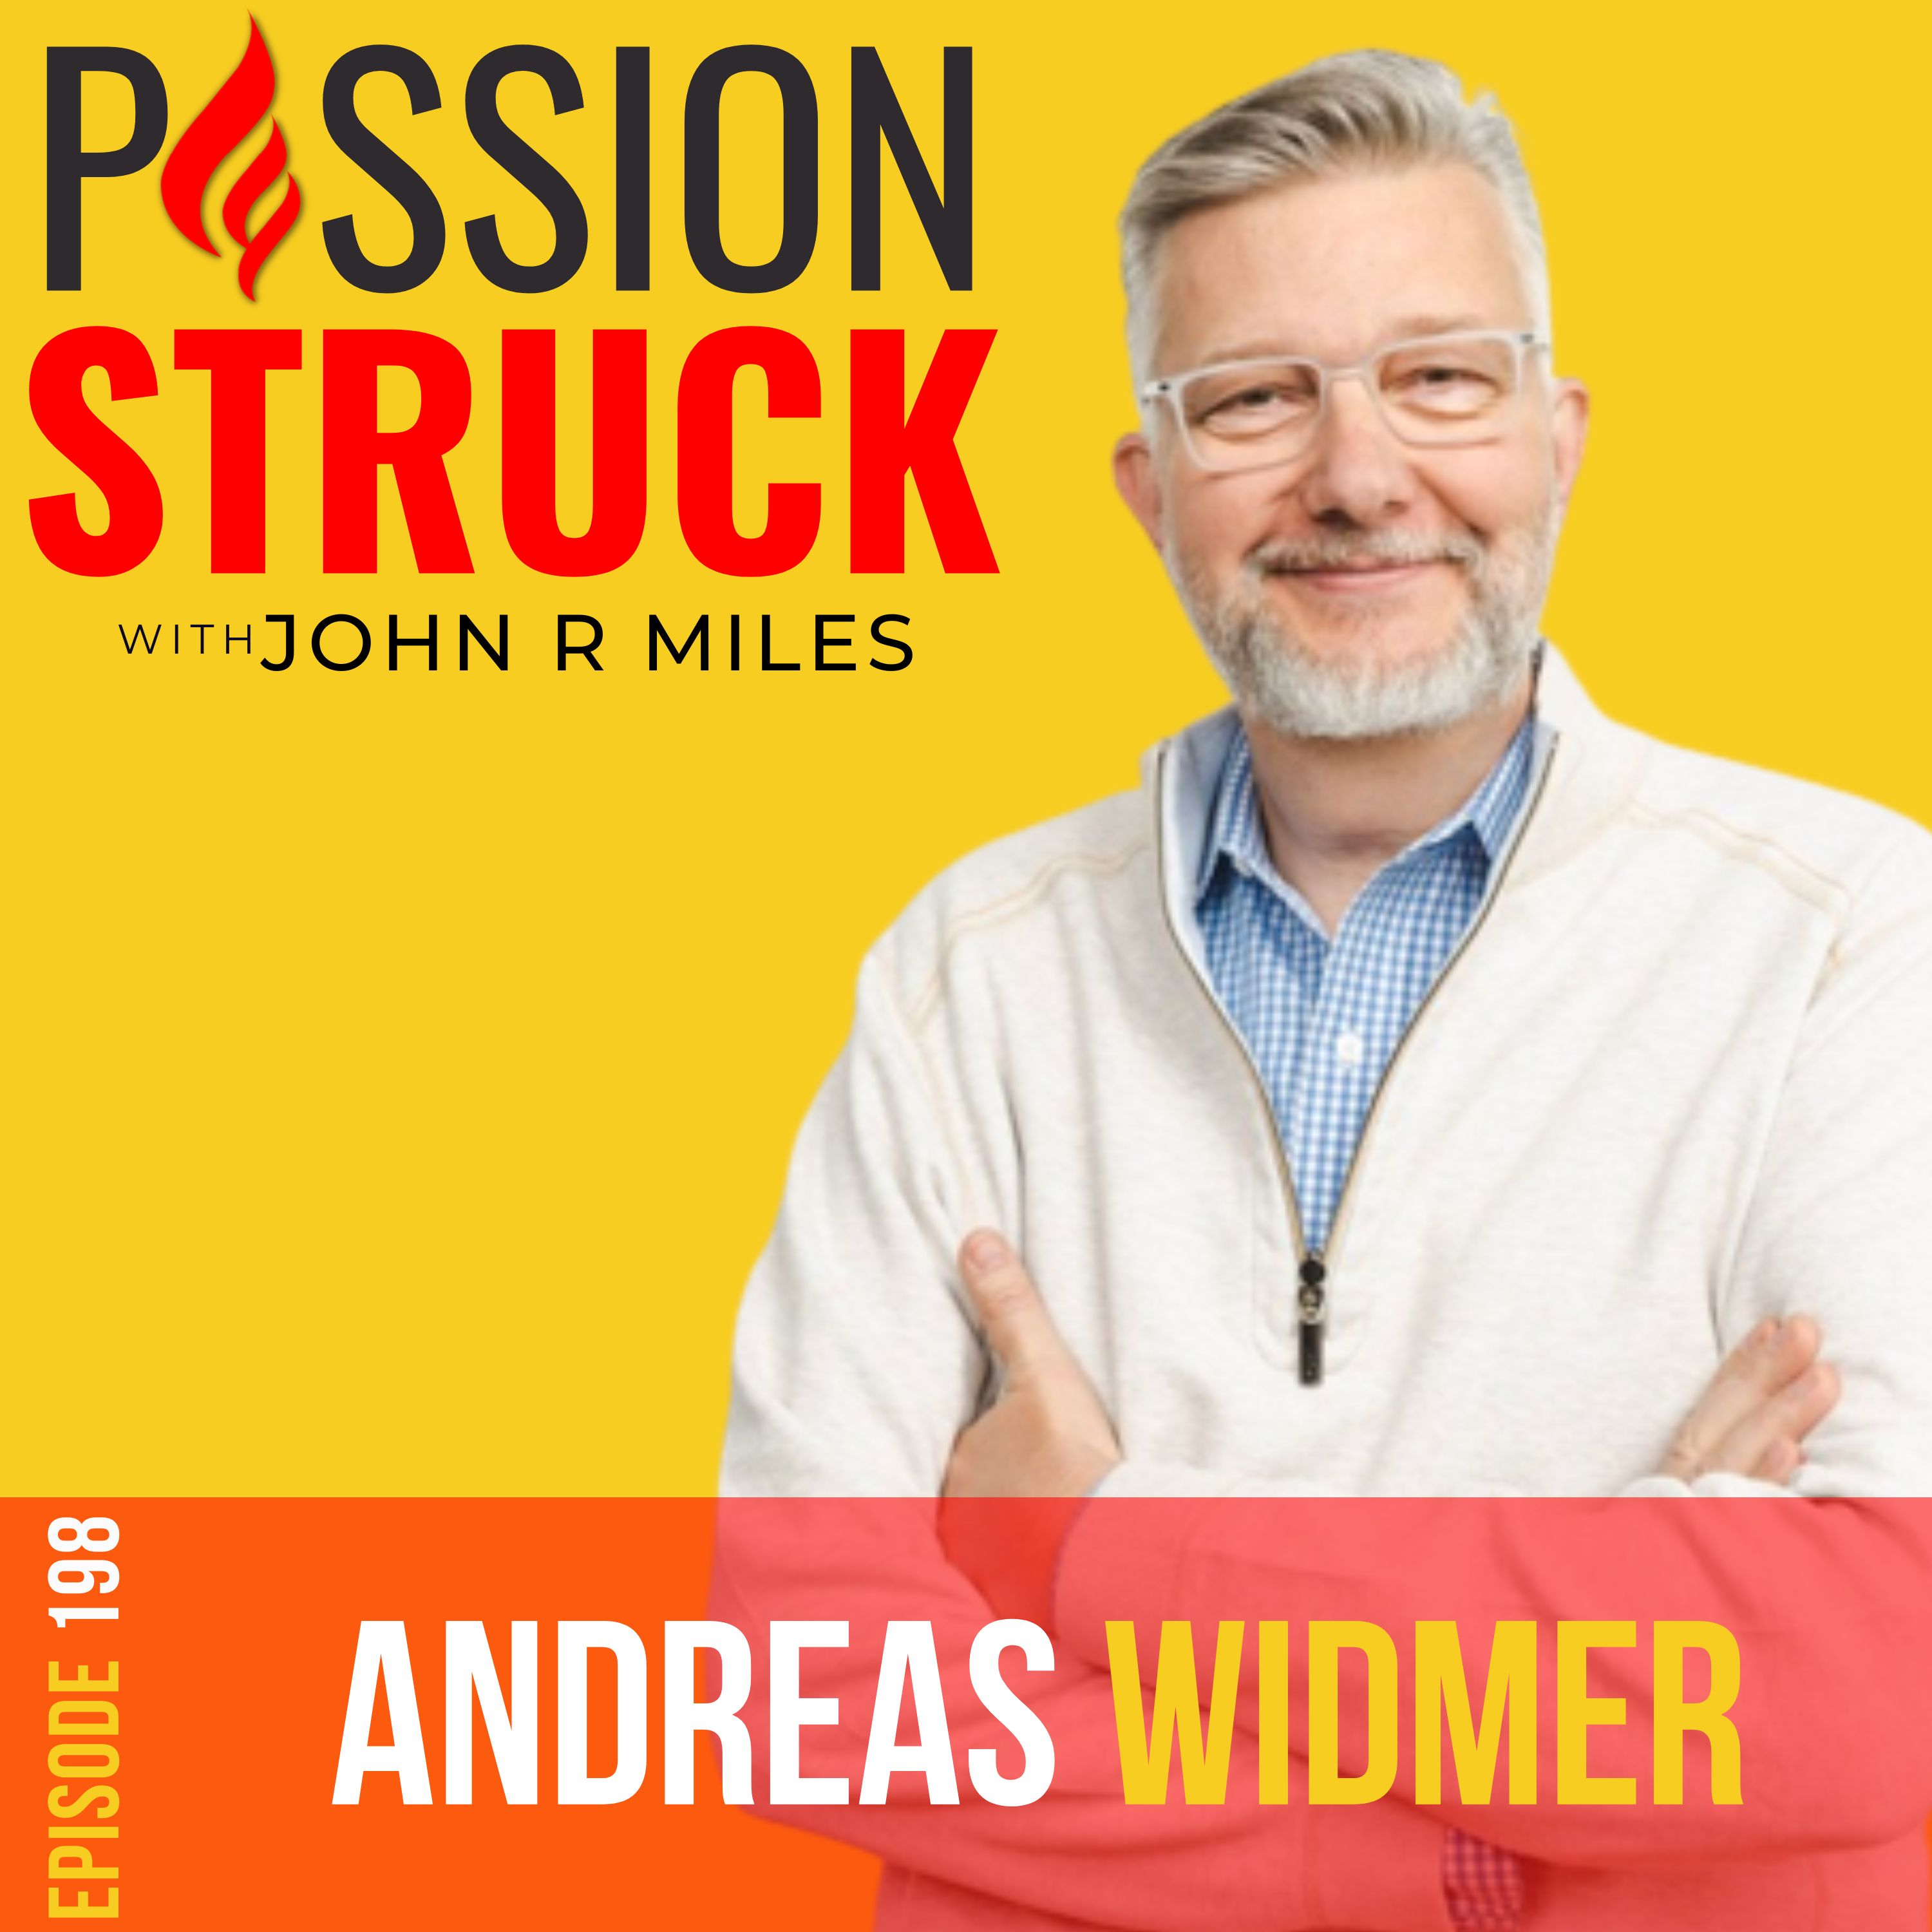 Passion Struck with John R. Miles album cover episode 198 featuring Andreas Widmer on principled entrepreneurship